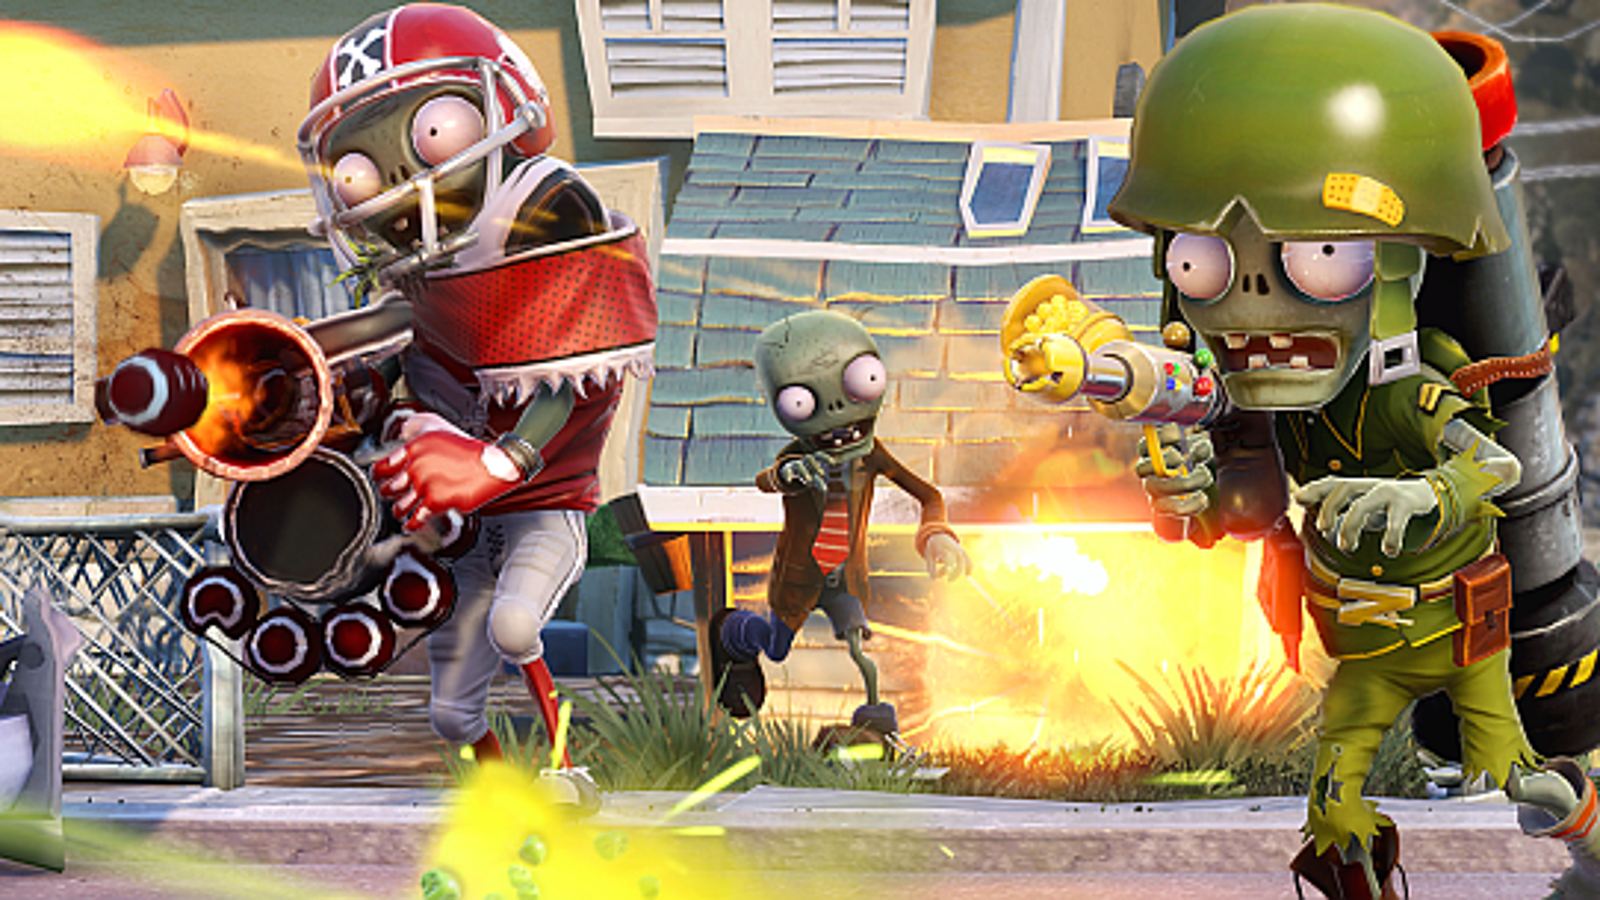 There's a decent game somewhere in Plants Vs. Zombies: Garden Warfare 2